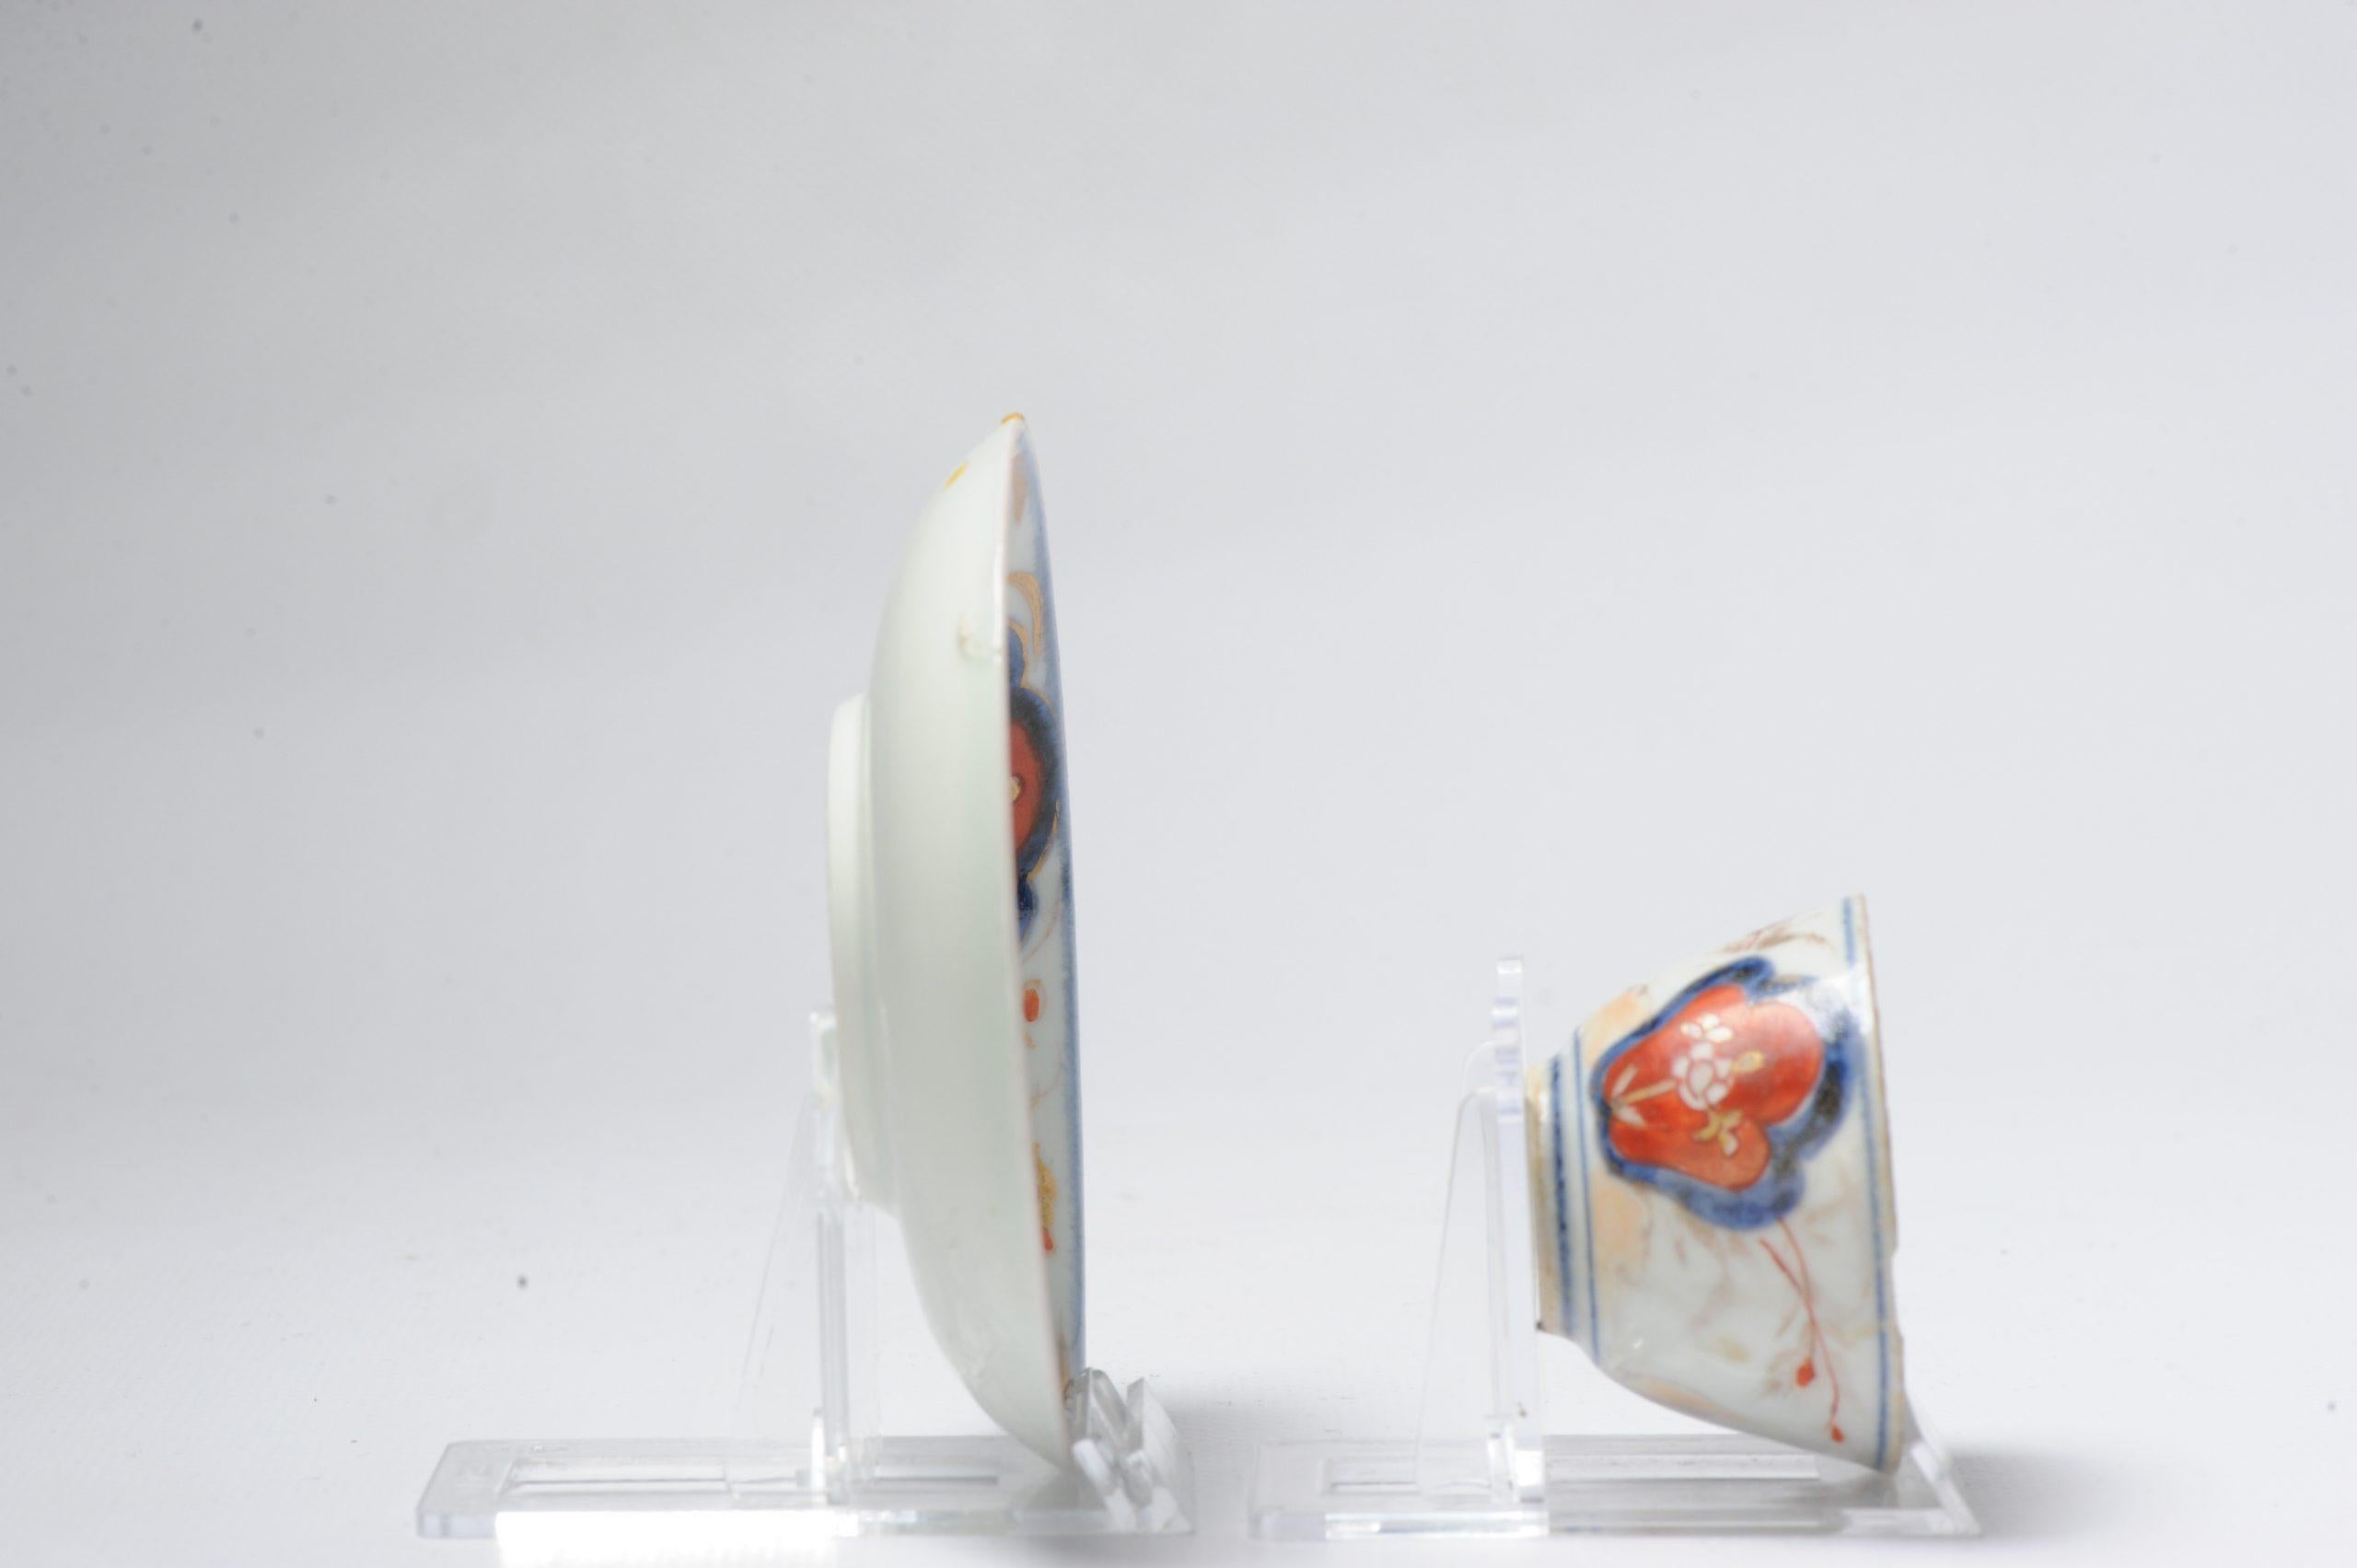 Lovely set from the edo period. With garden scene of quails.

Additional information:
Material: Porcelain & Pottery
Type: Bowls, Tea/Coffee Drinking: Bowls, Cups & Teapots
Japanese Style: Imari
Region of Origin: Japan
Period: 18th century Edo Period